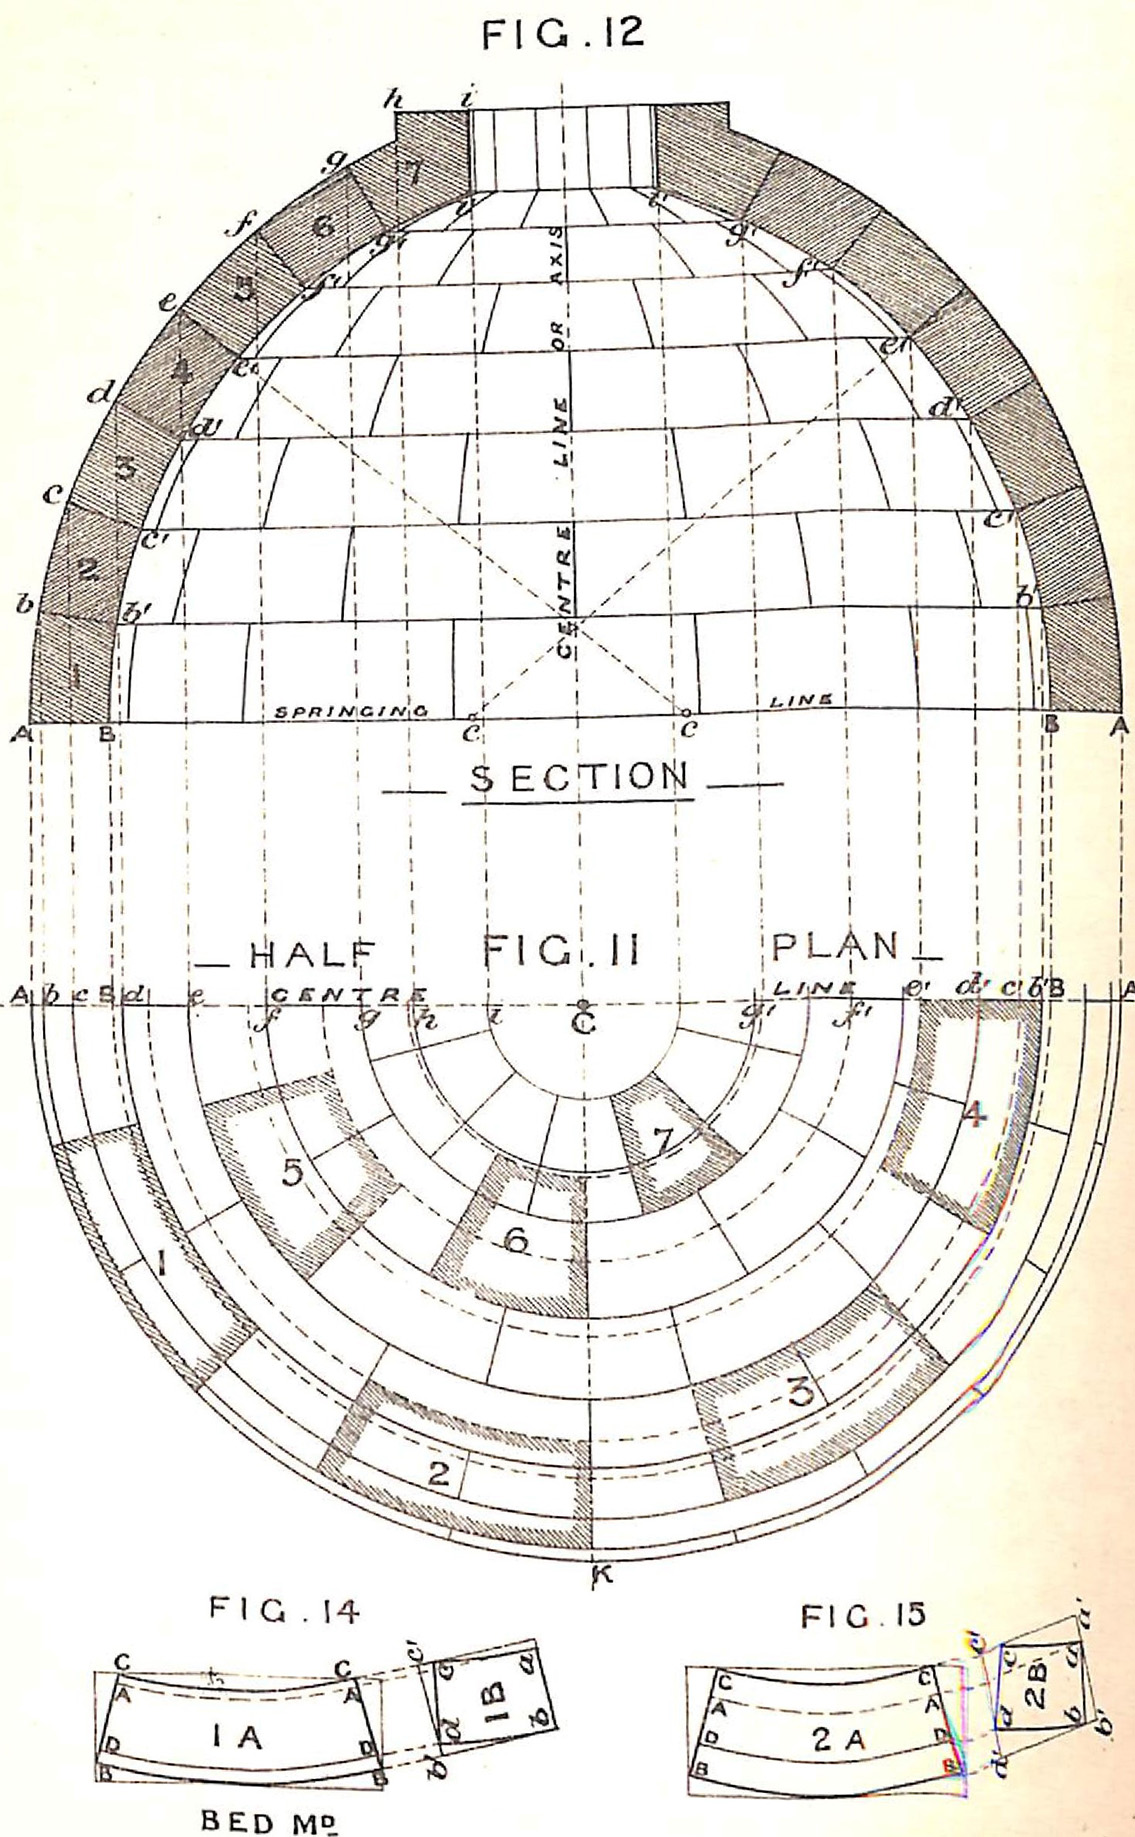 Diagram of a Dome